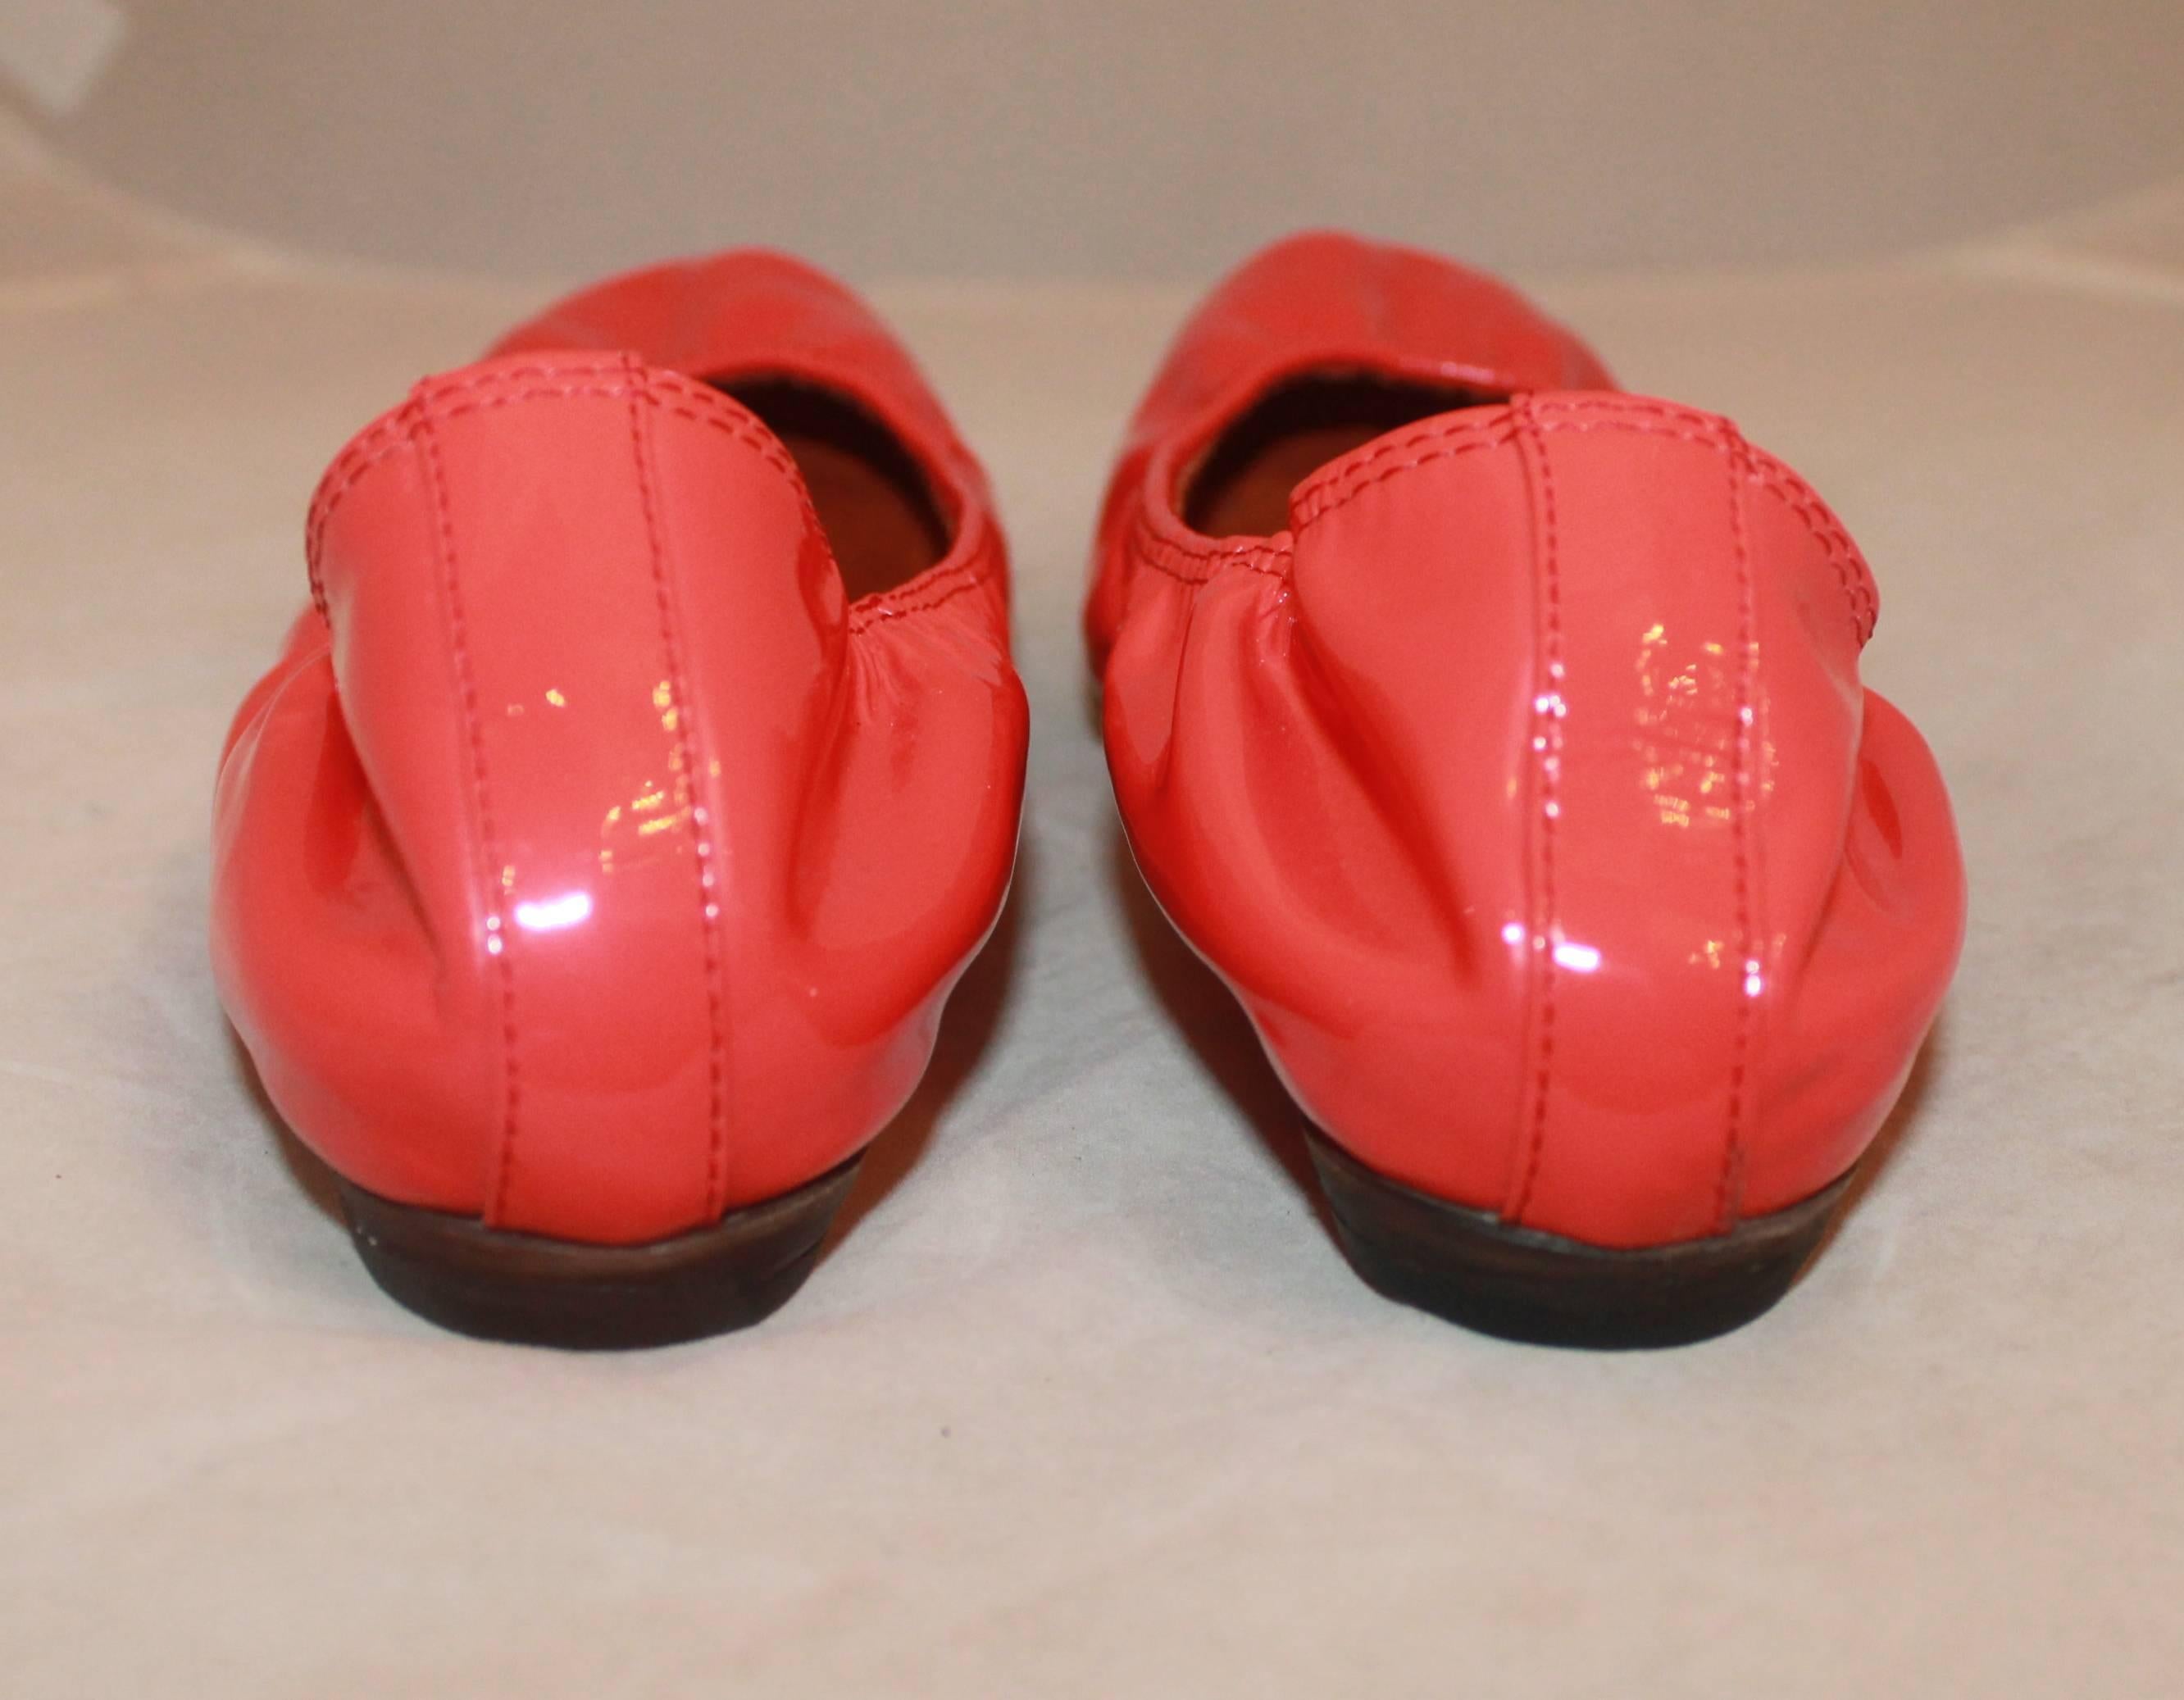 Pink Lanvin Coral Patent Ballet Flats w/ Interior Leather Lining - 8